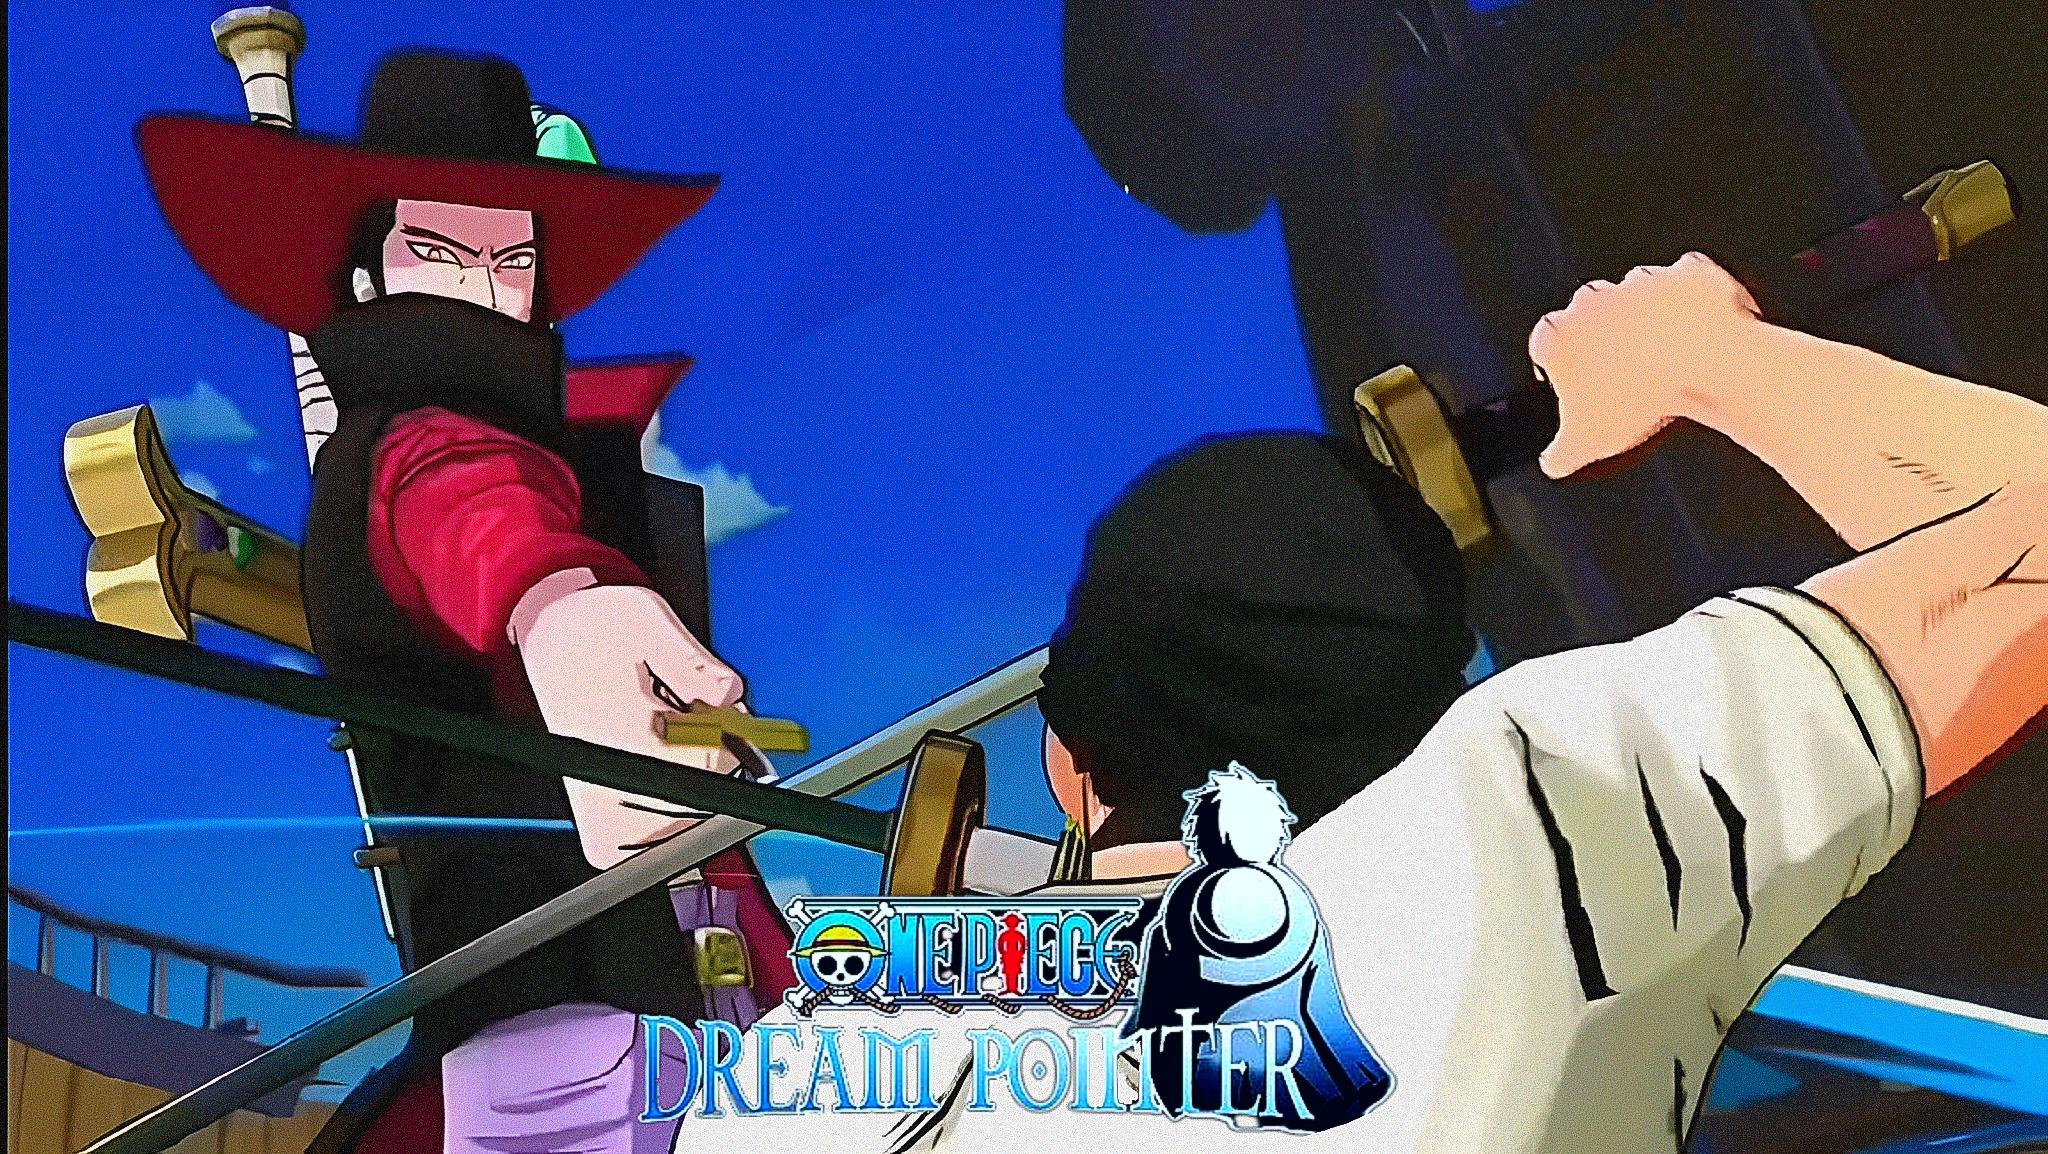 One Piece: Project Fighter 航海王: Project Fighter - Game reveal